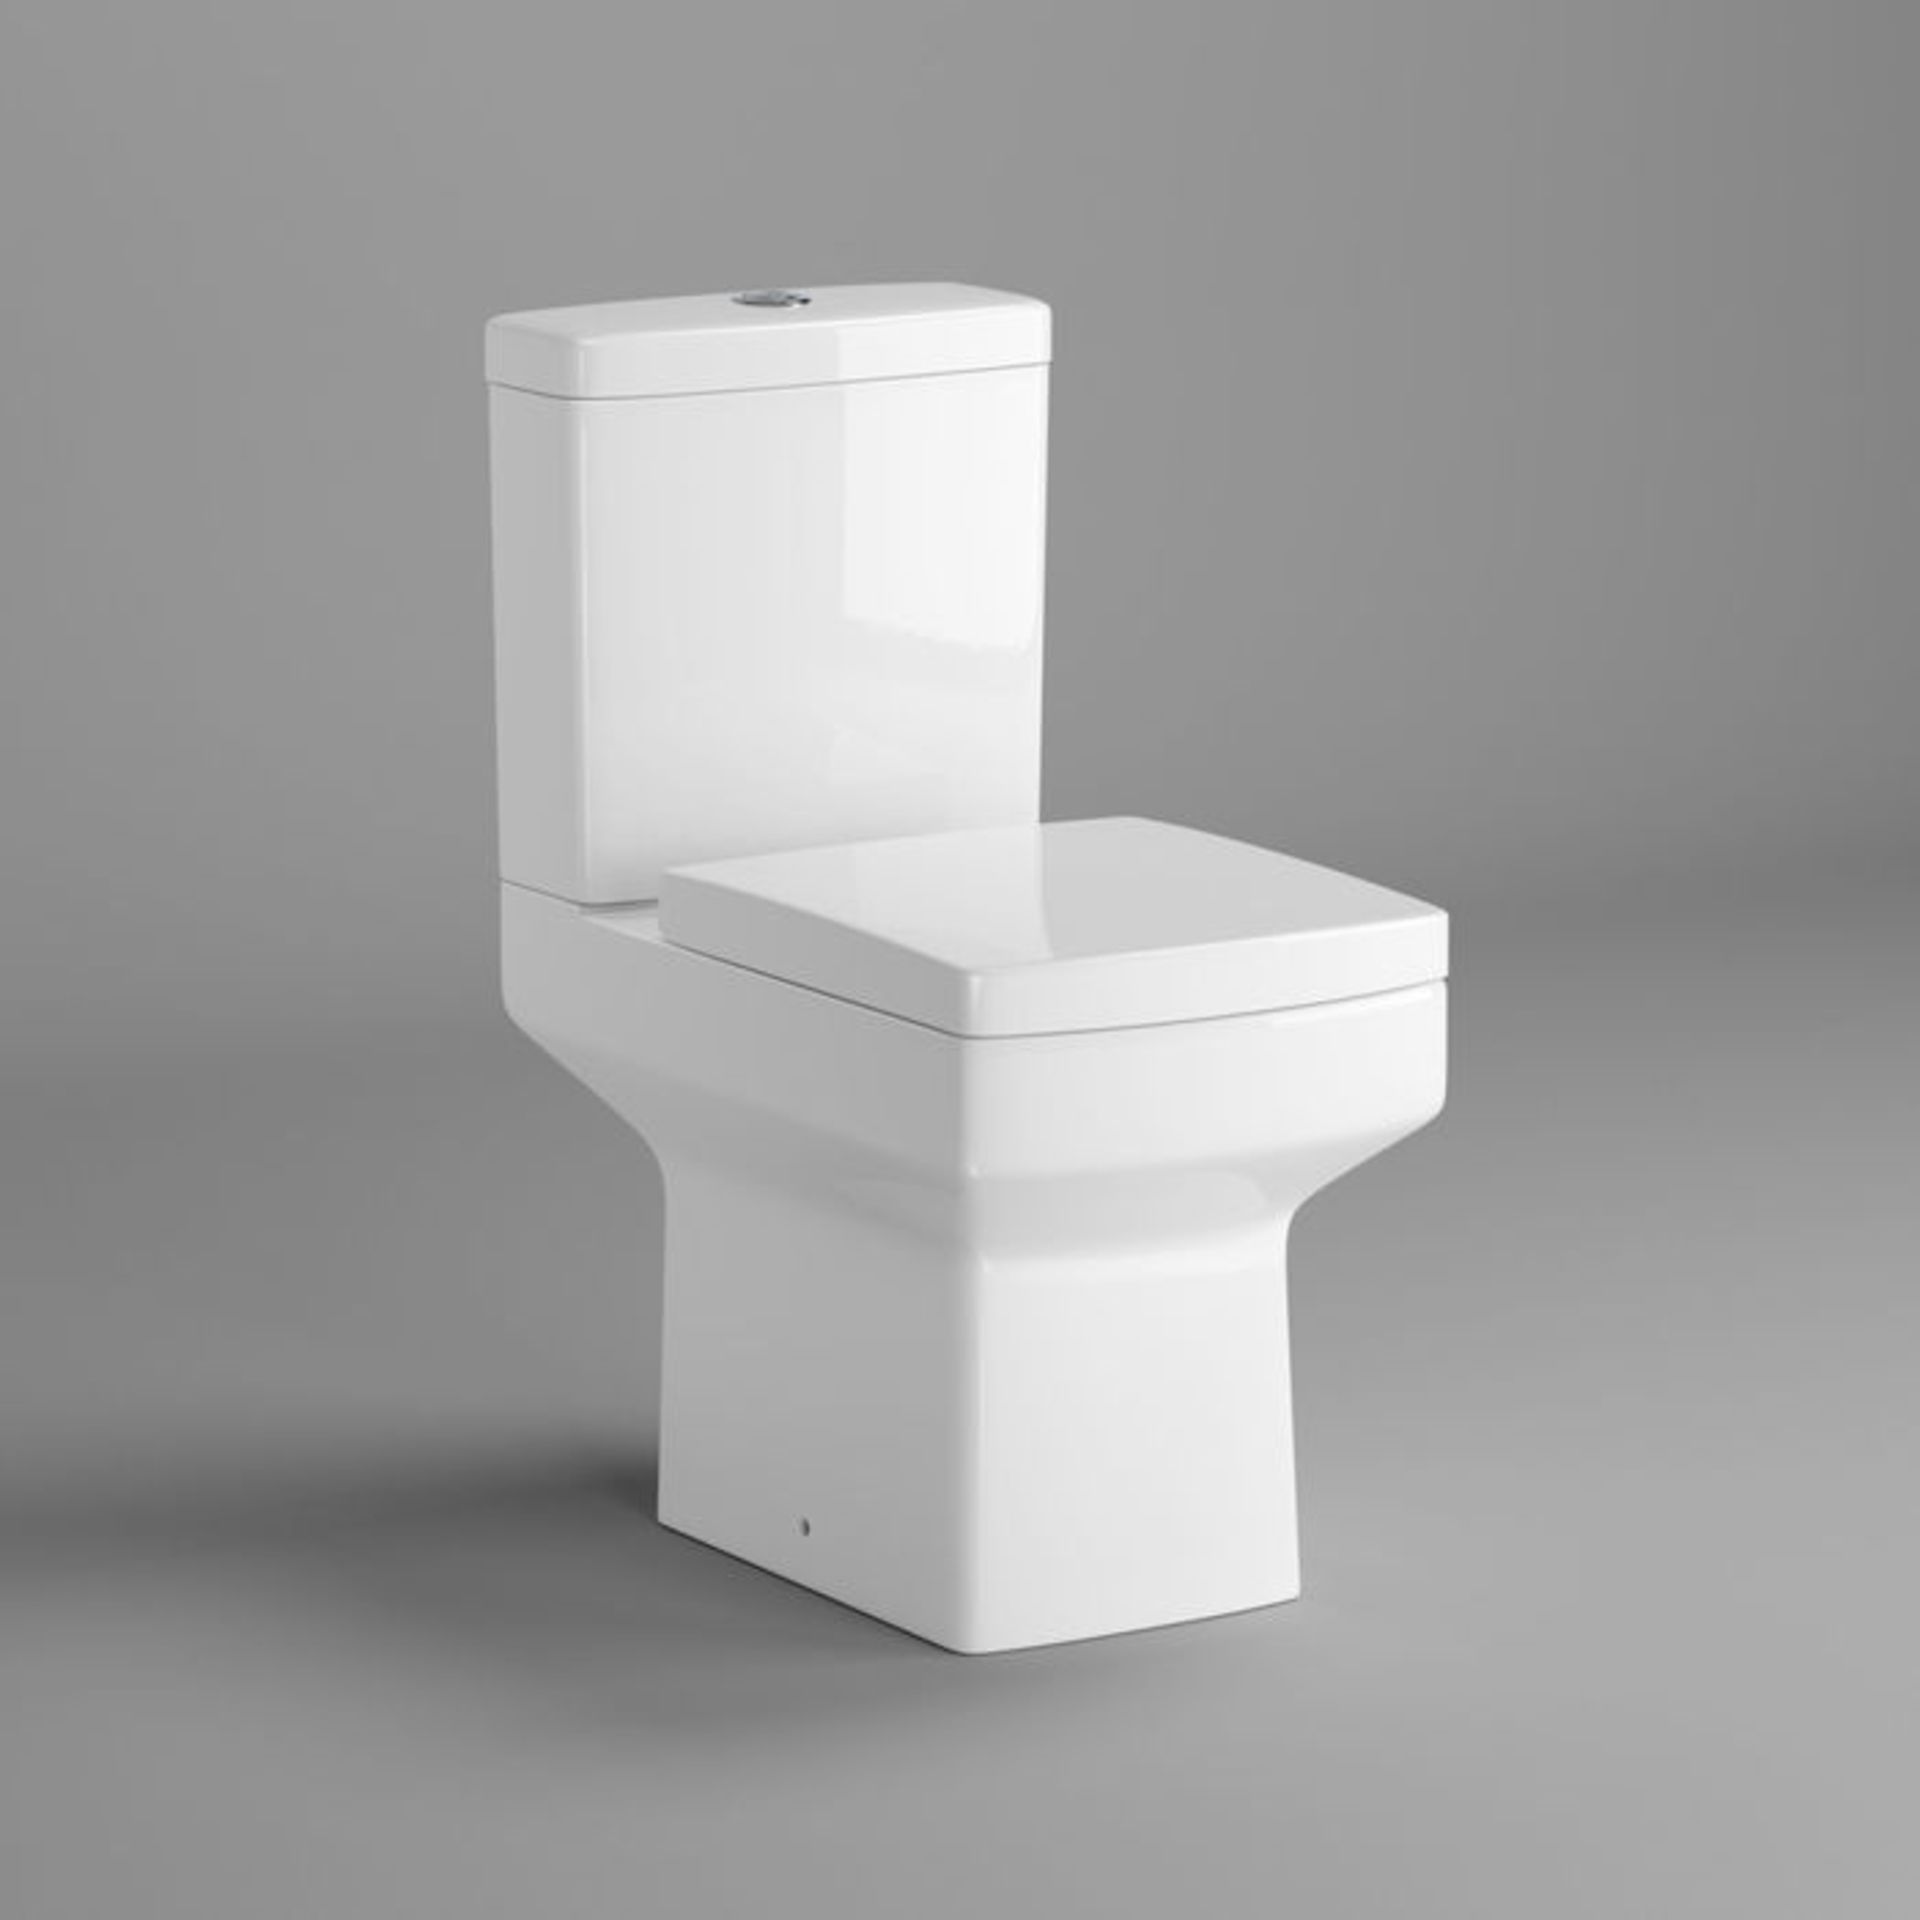 (PA25) Belfort Close Coupled Toilet & Cistern inc Soft Close Seat. Made from White Vitreous China - Image 5 of 5